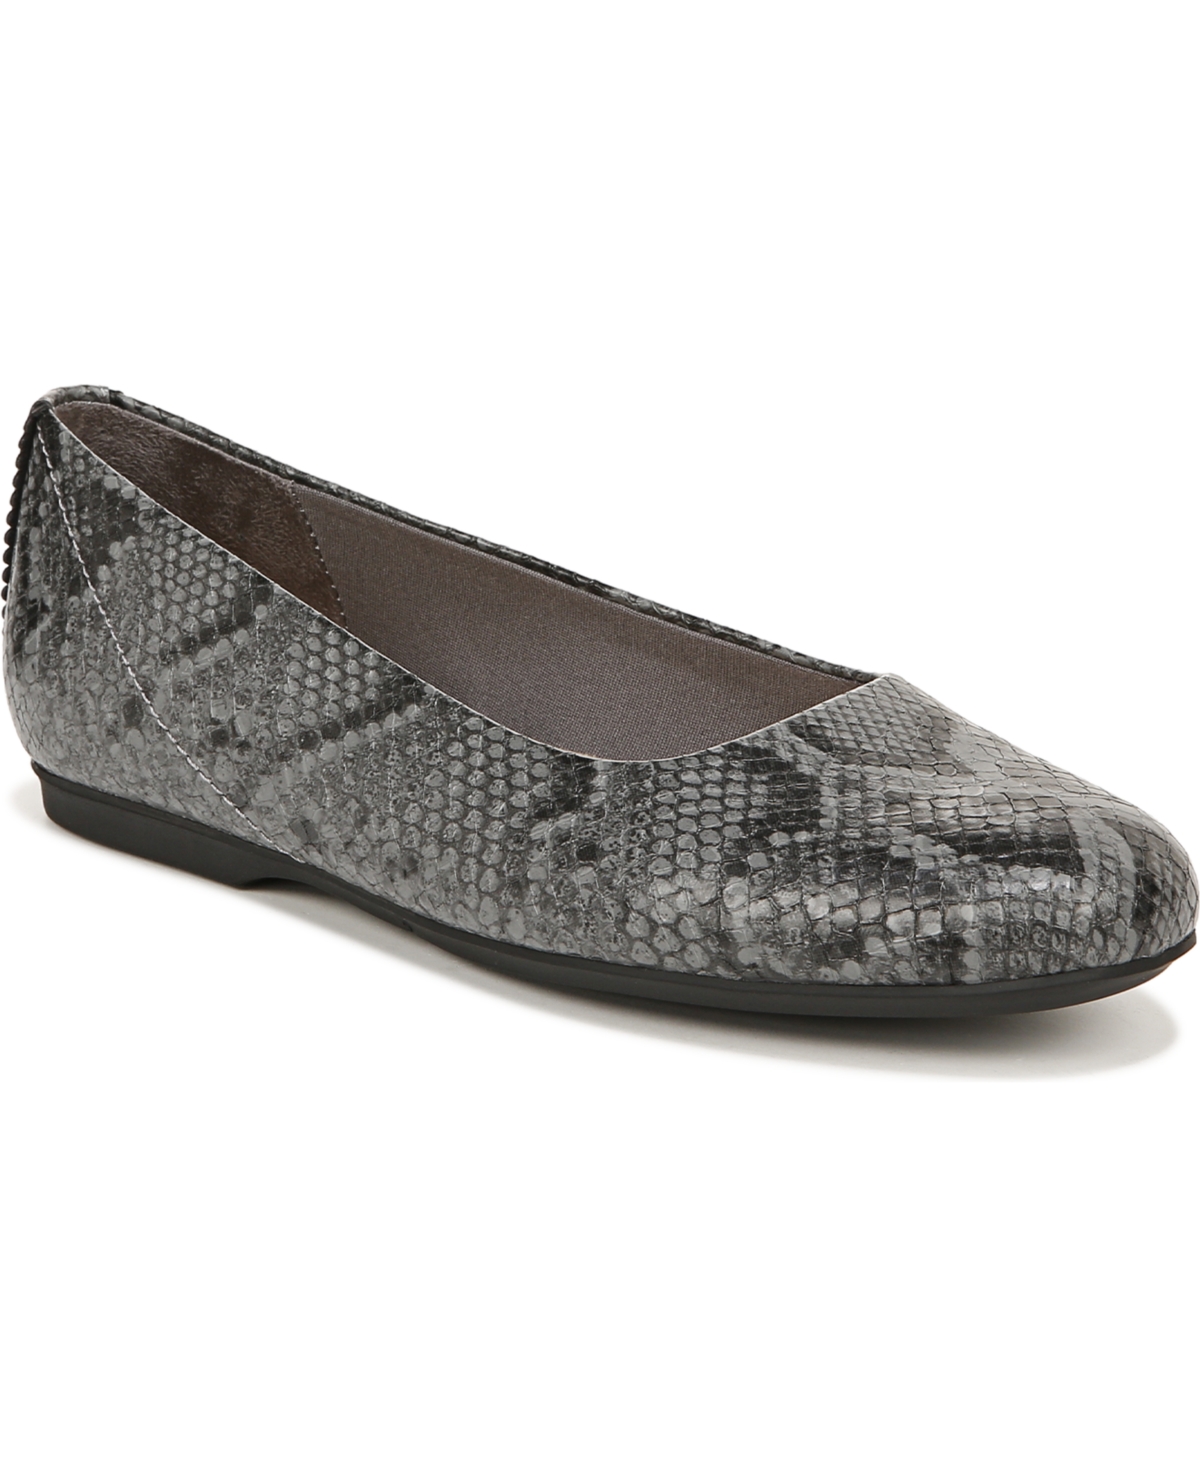 Women's Wexley Flats - Grey Faux Leather